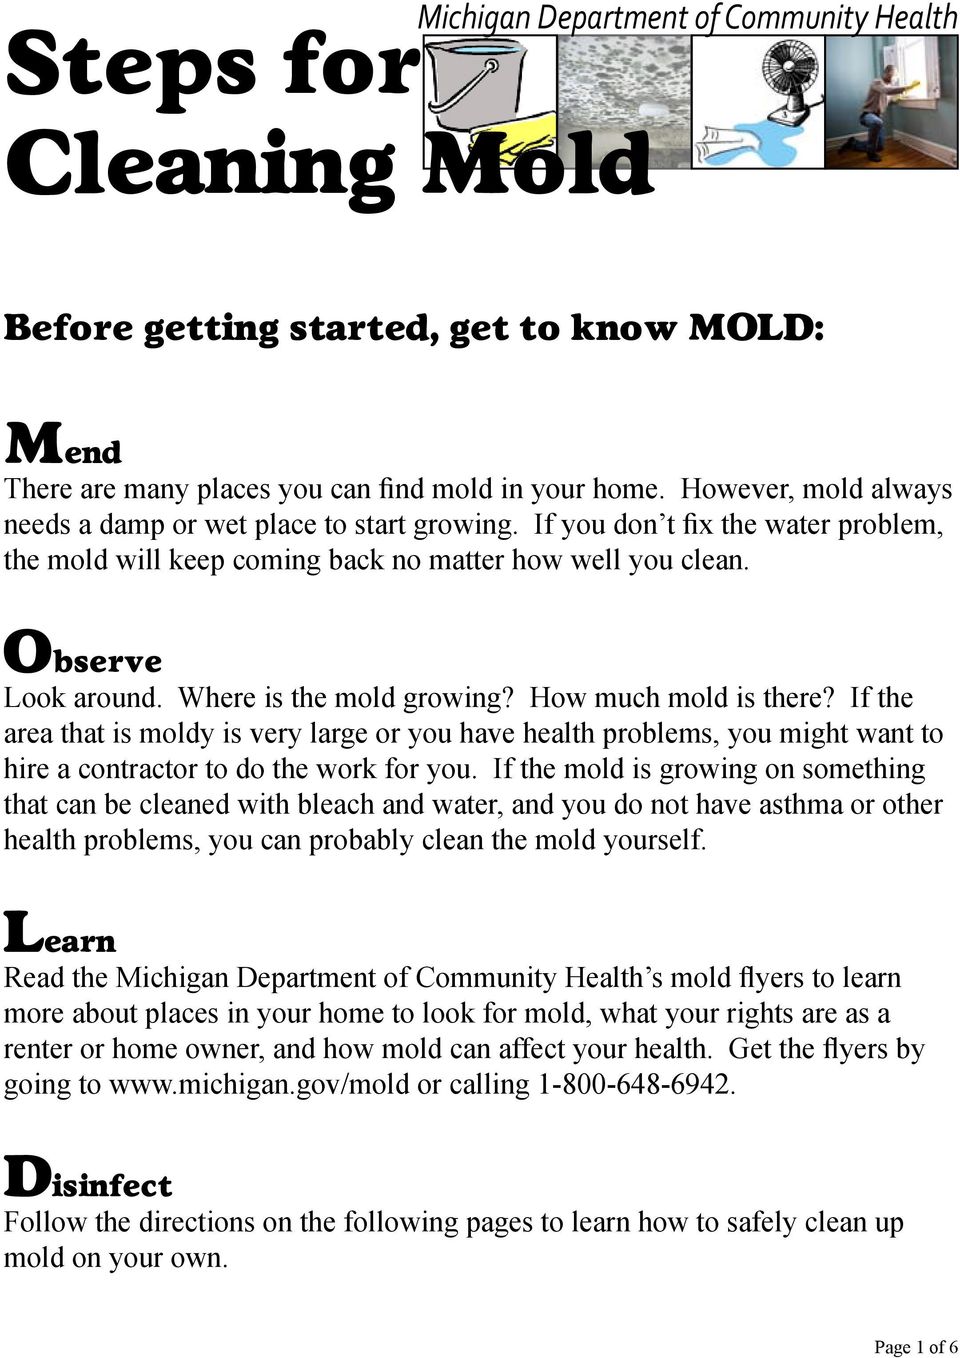 Where is the mold growing? How much mold is there? If the area that is moldy is very large or you have health problems, you might want to hire a contractor to do the work for you.